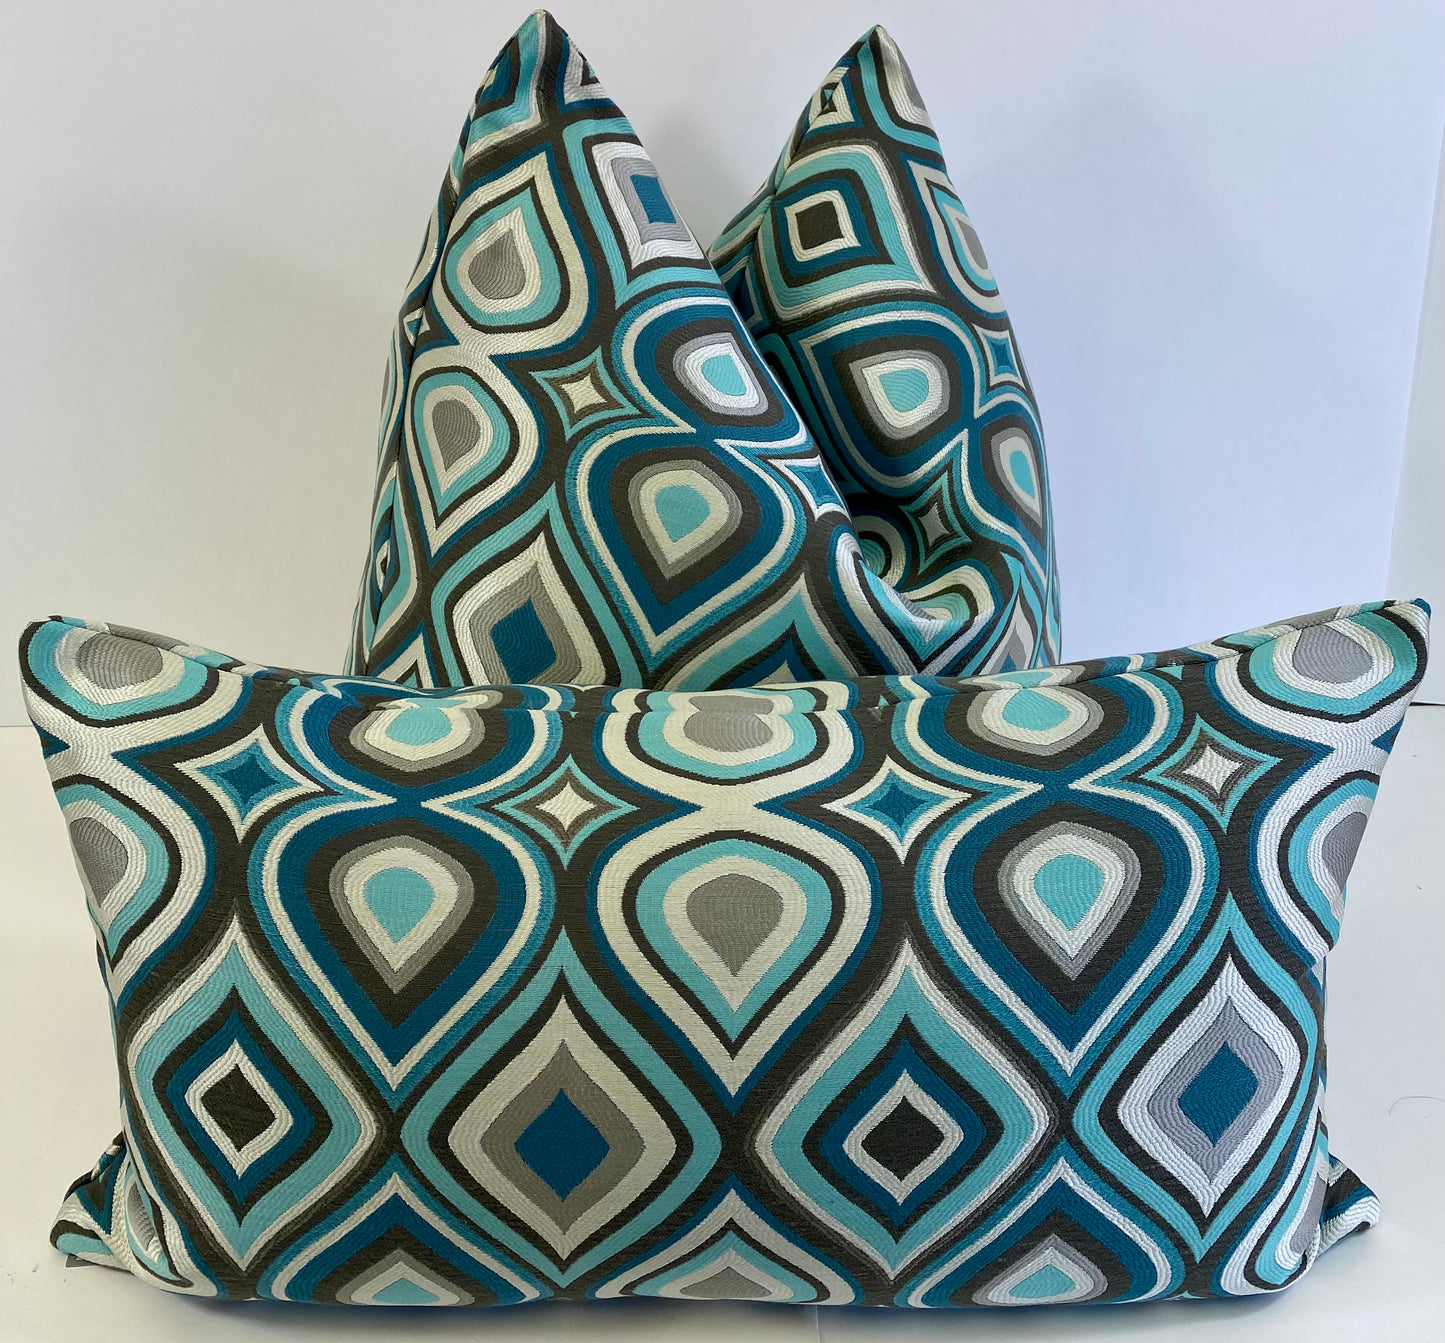 Luxury Lumbar Pillow - 24" x 14" - Doyle; Teals, taupe silvers in an elegant shimmering design